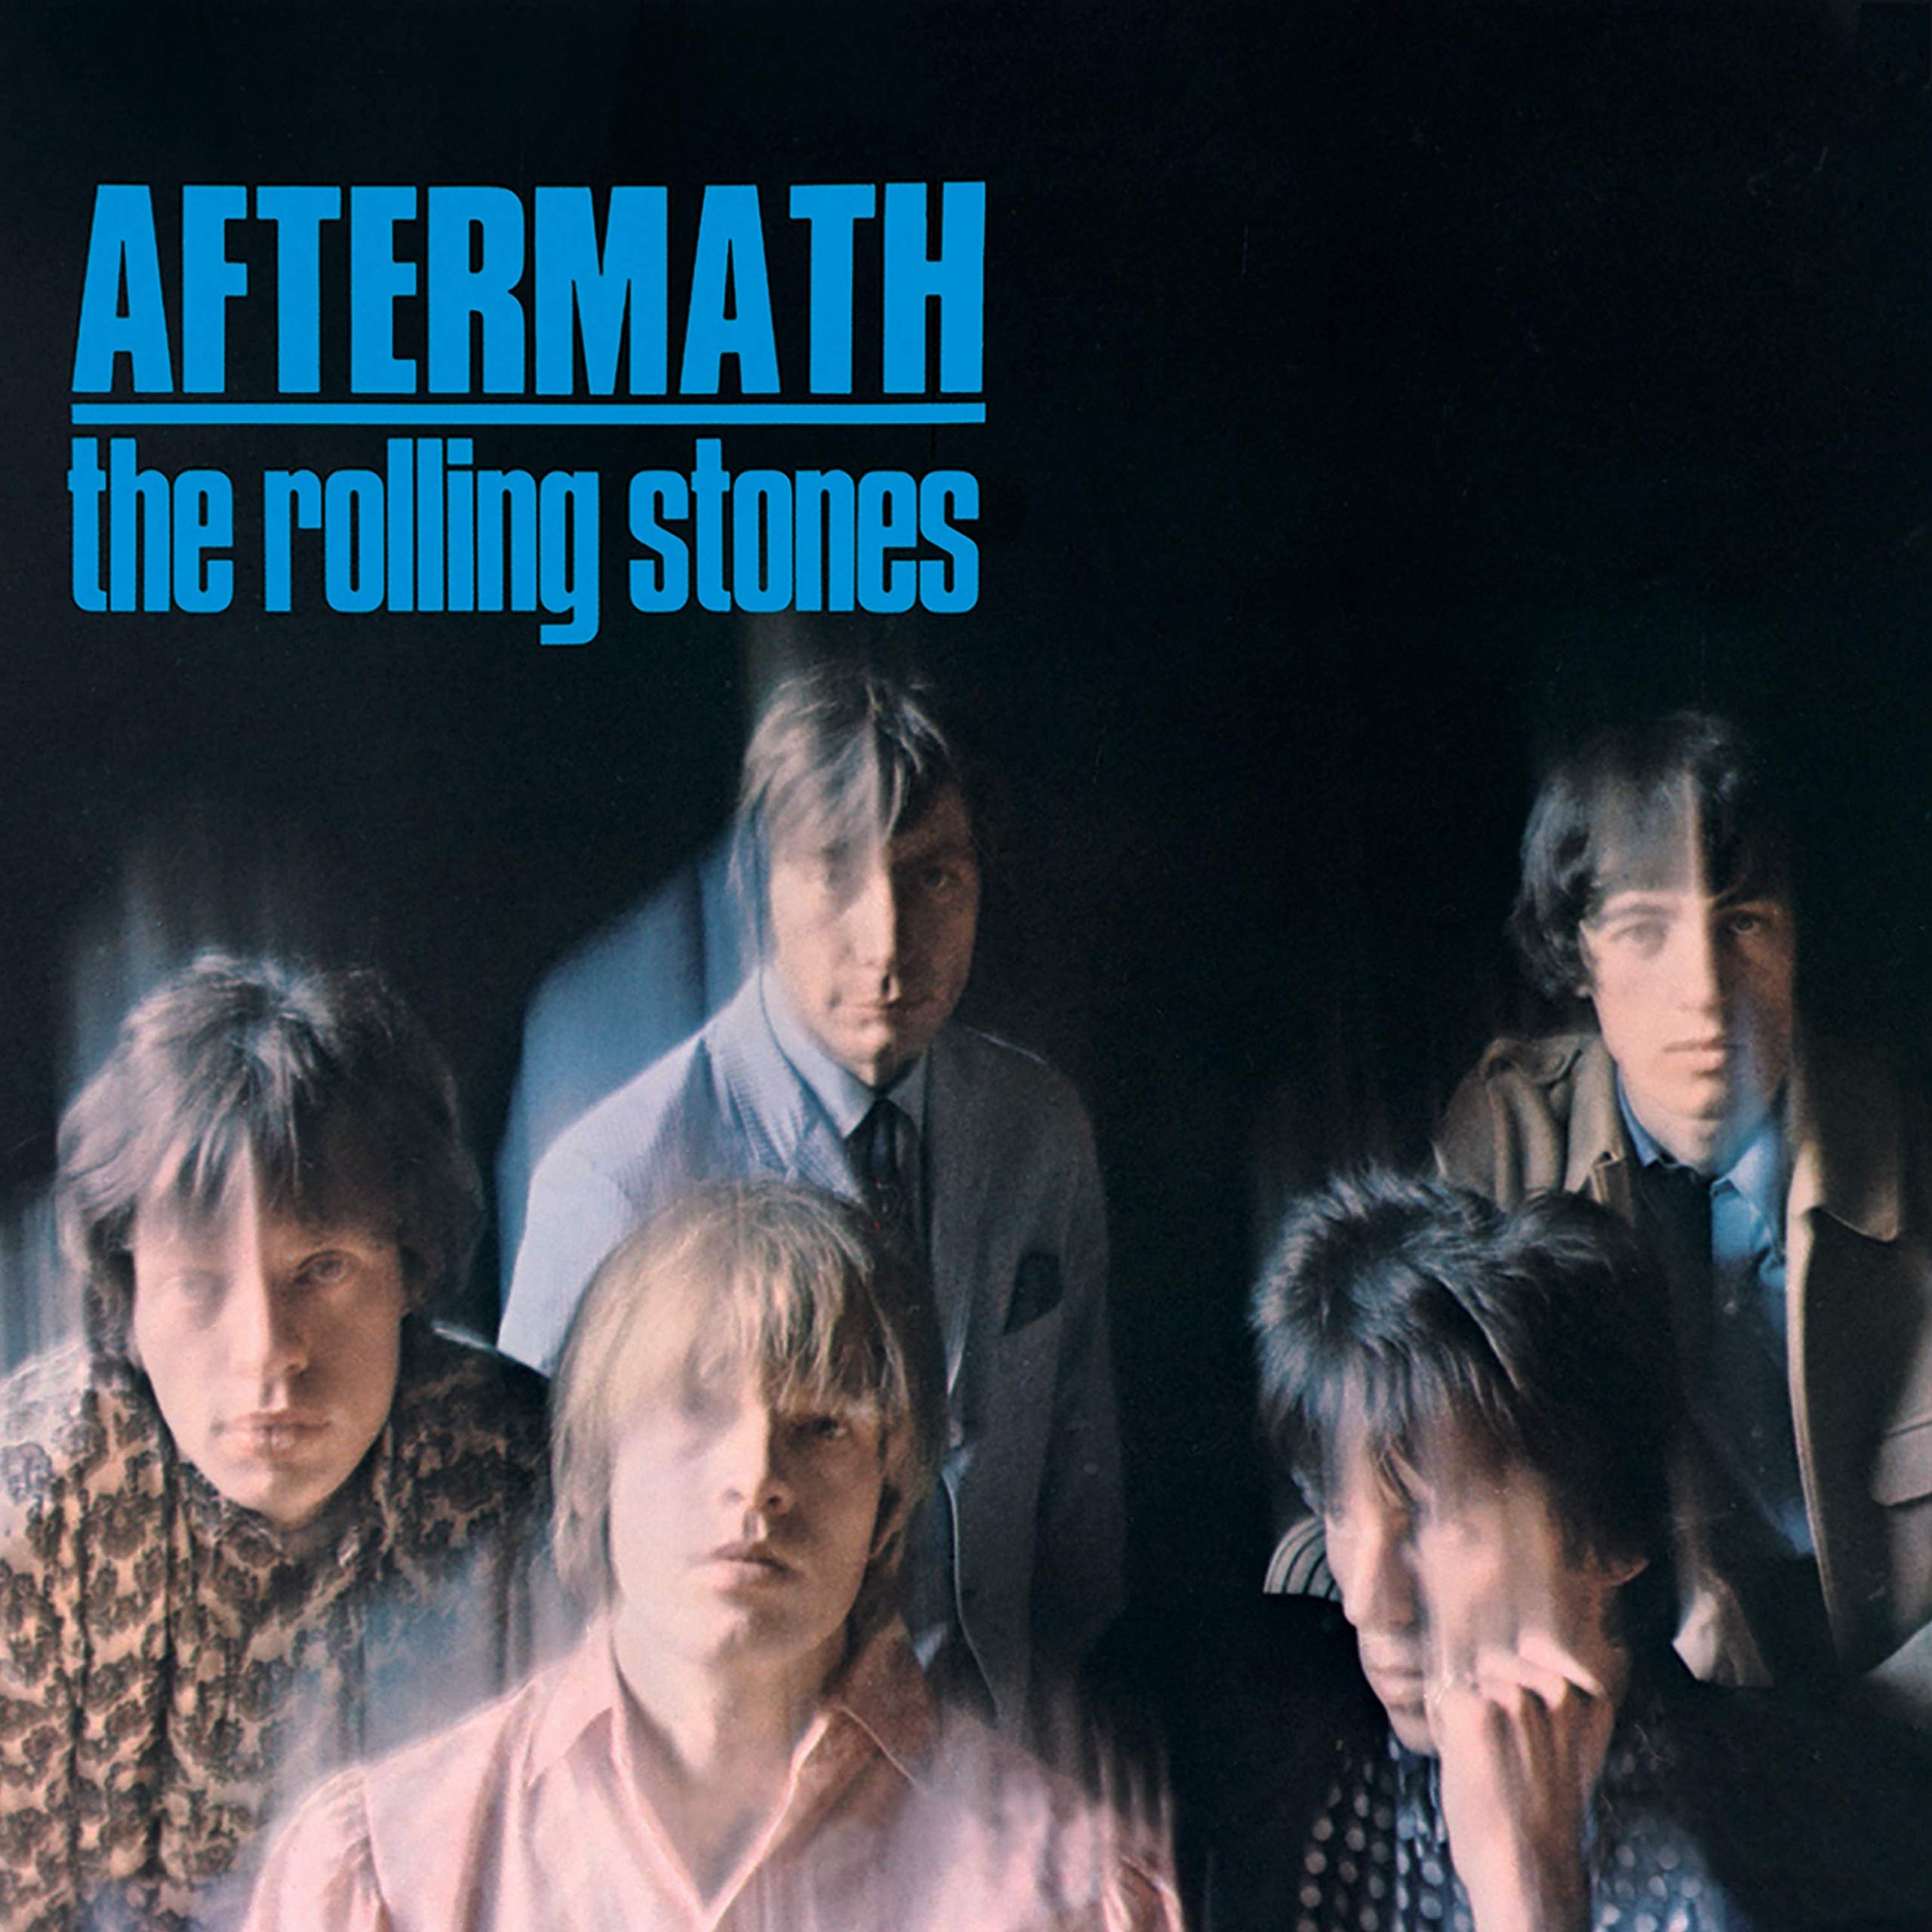 The Rolling Stones-Aftermath (US)-24-88-WEB-FLAC-REMASTERED-2014-OBZEN Download